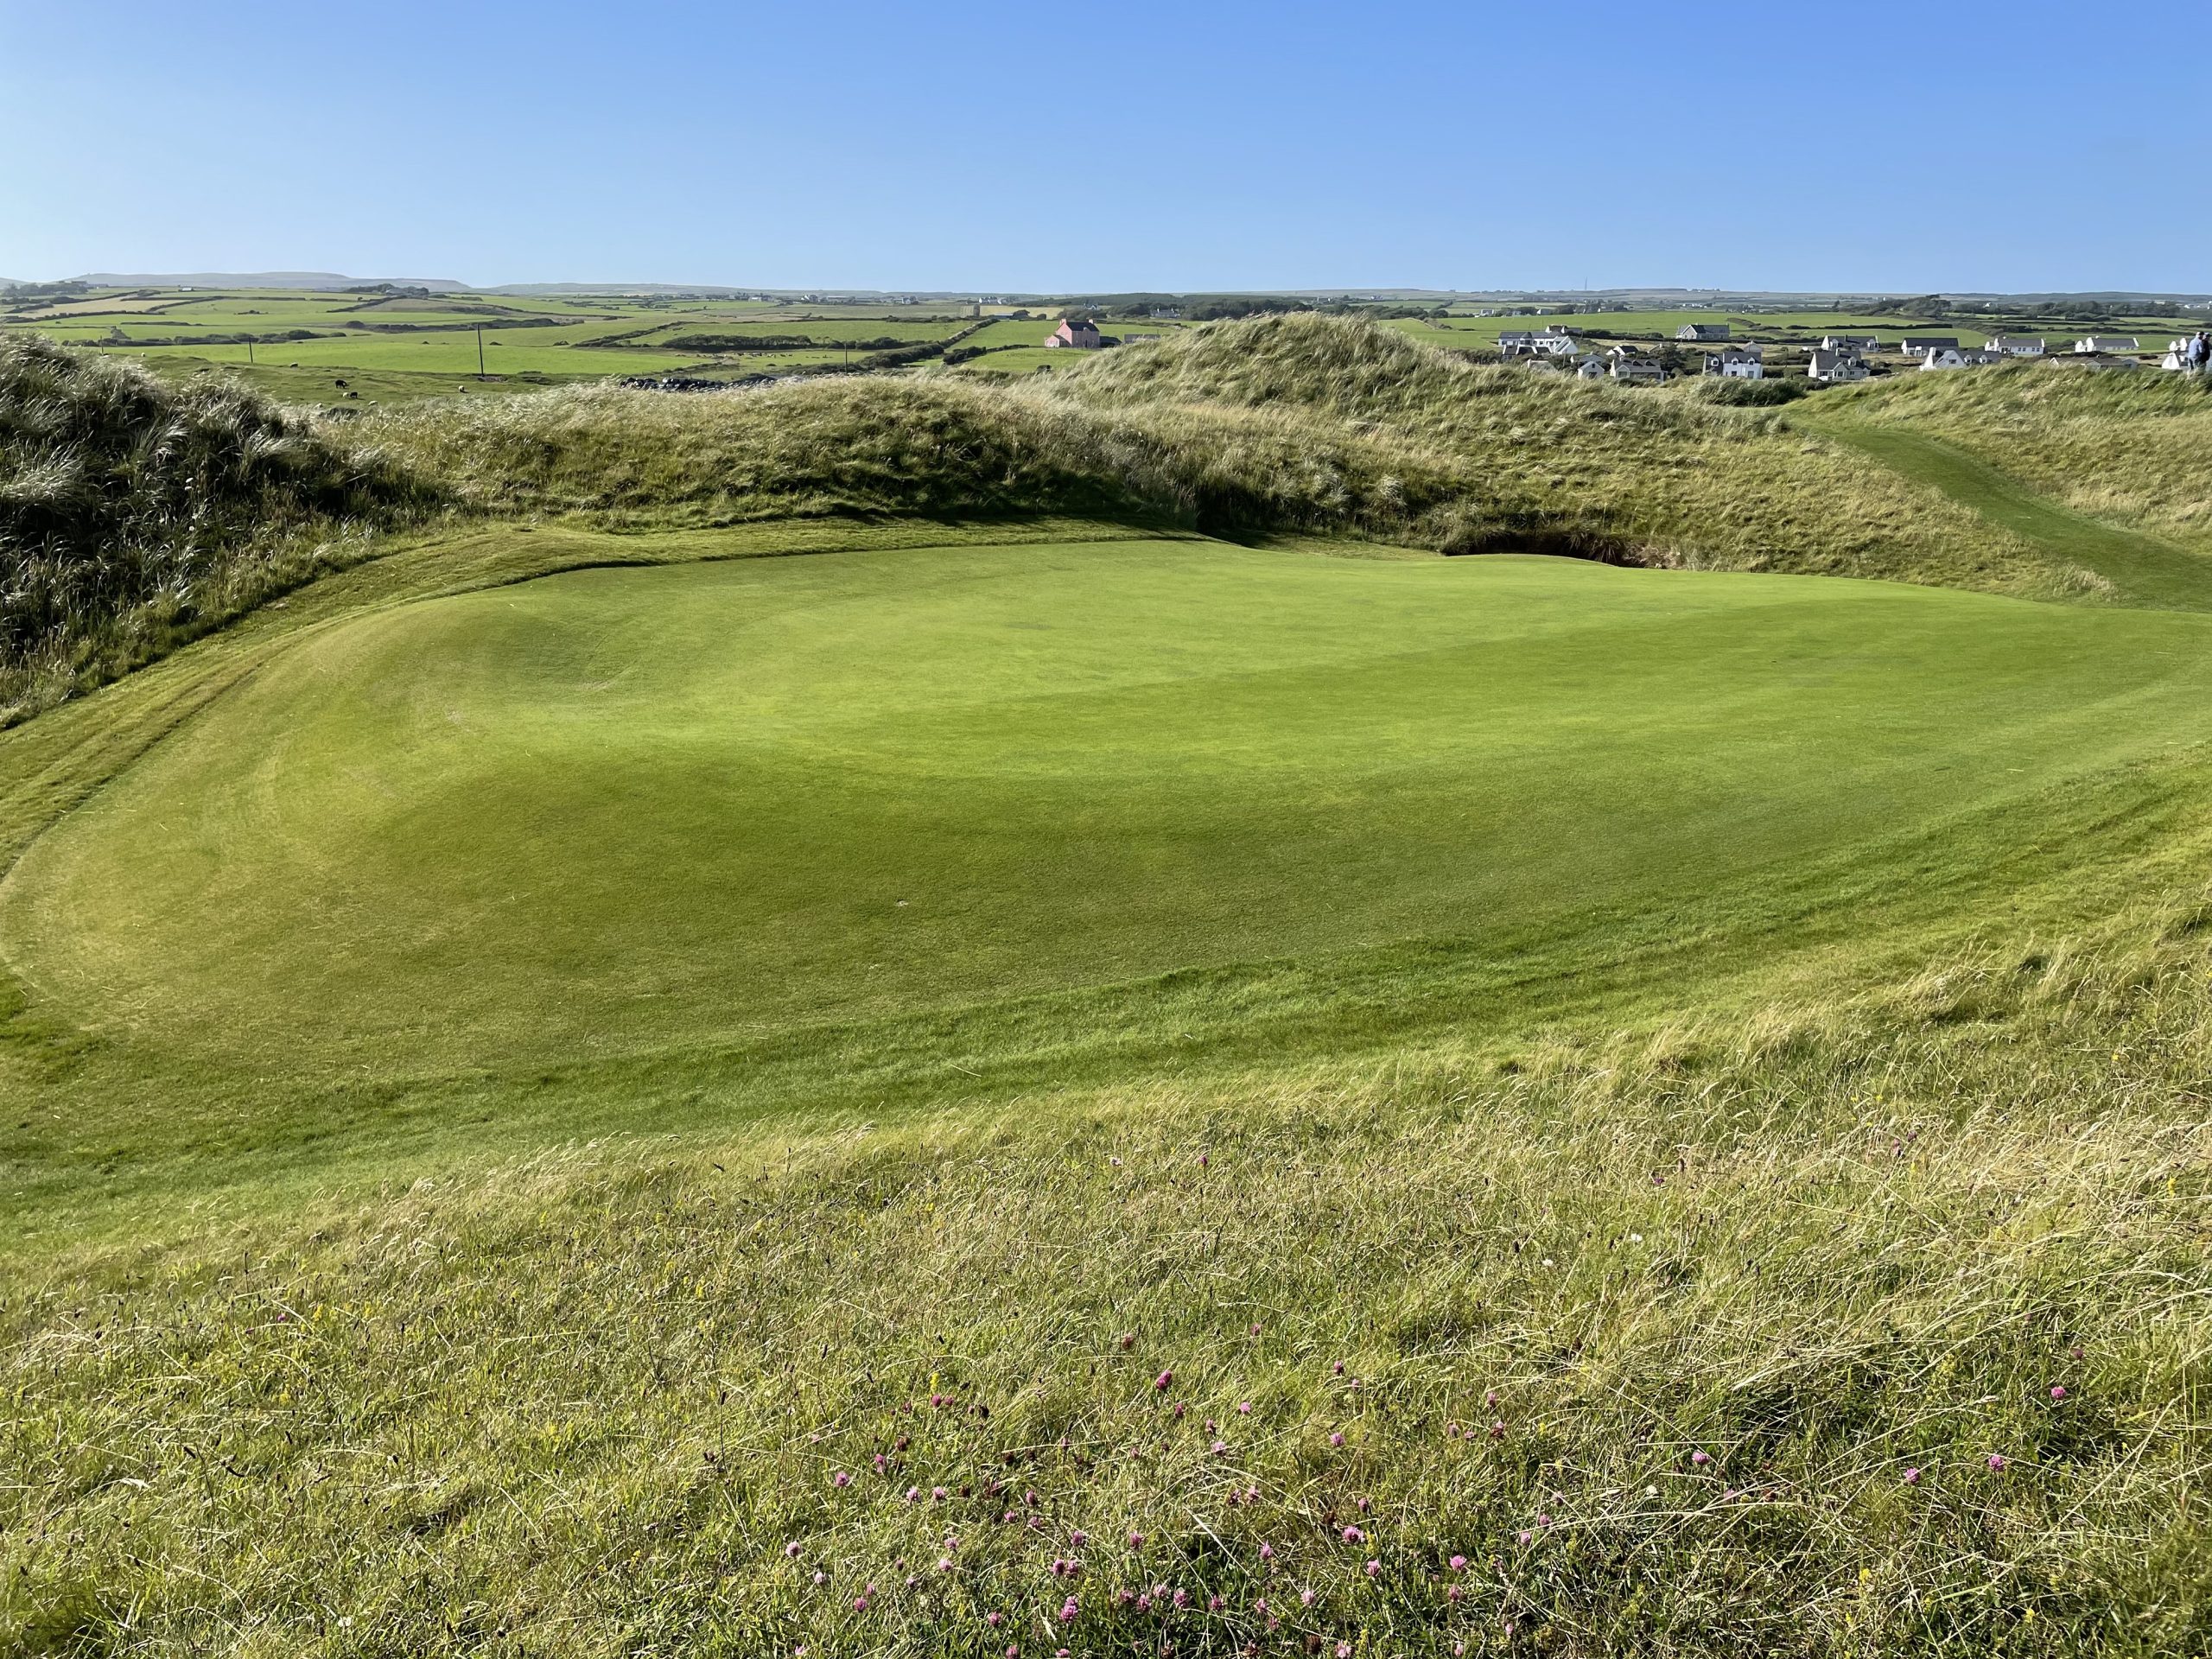 The 11A alternate green at Lahinch Golf Club, designed by Alister MacKenzie.